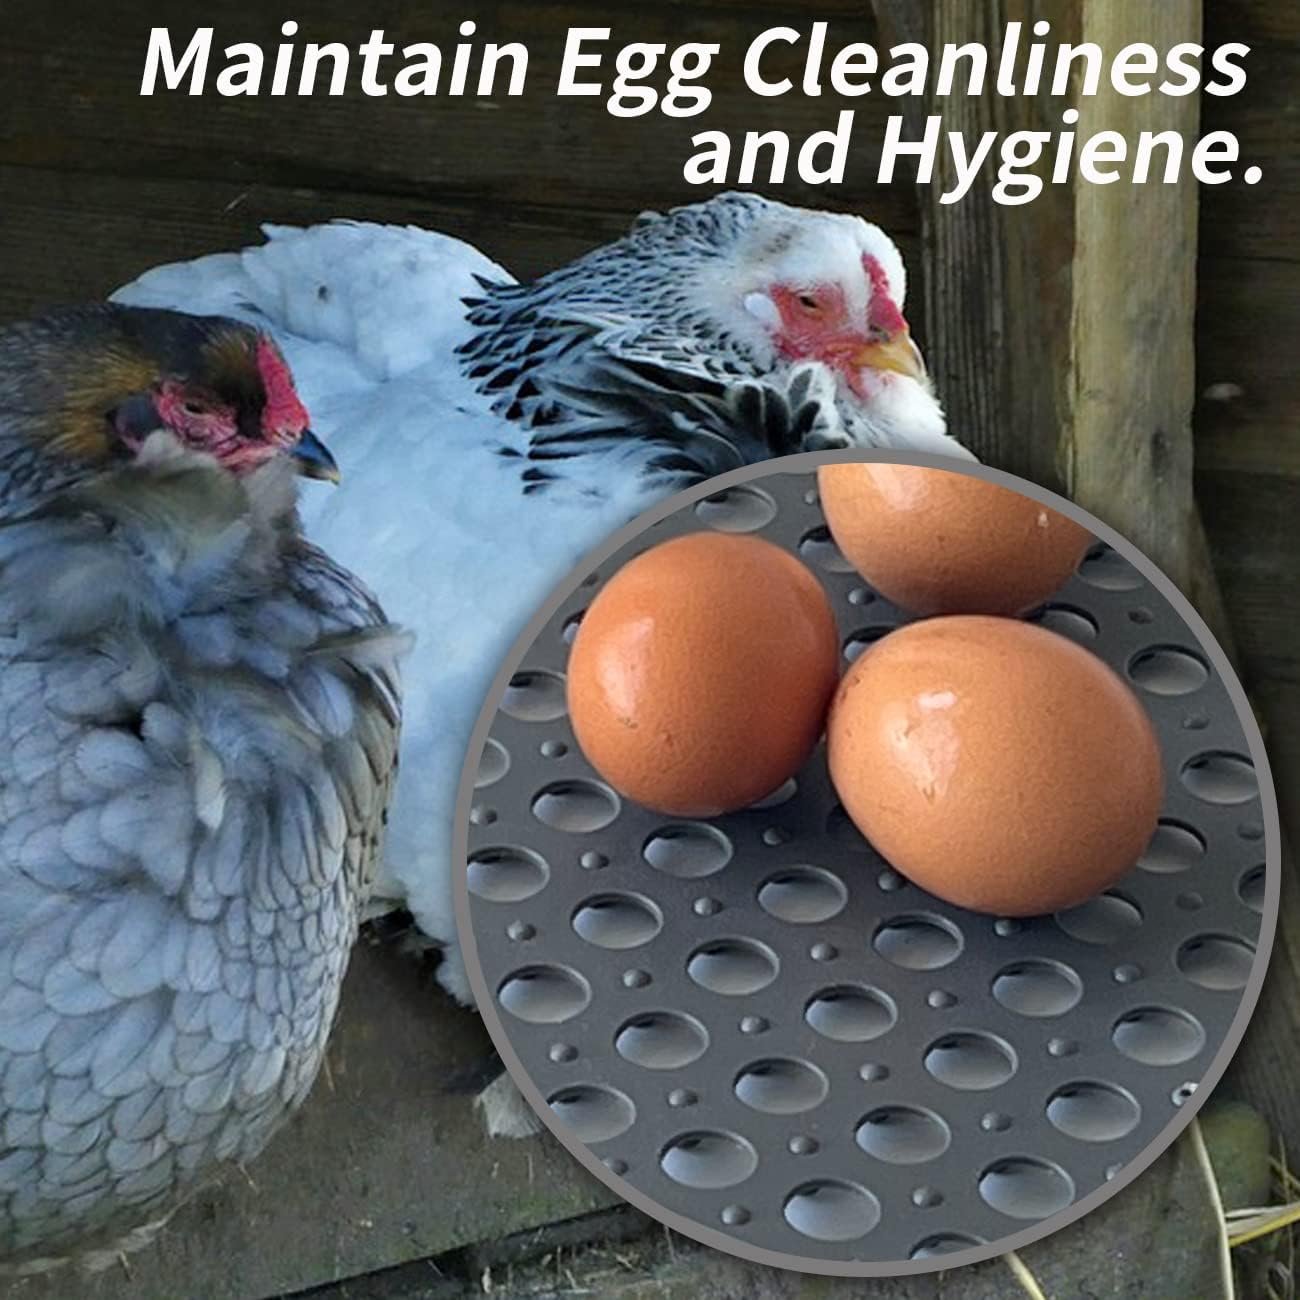 FlidRunest 6Pack Washable Chicken Nesting Pads-Chicken Nesting Box Pads-Durable Chicken Bedding for Coop-Poultry Bedding for Egg Laying Hens-Mats Nesting Box Liners for Chicken Coops (Grey)